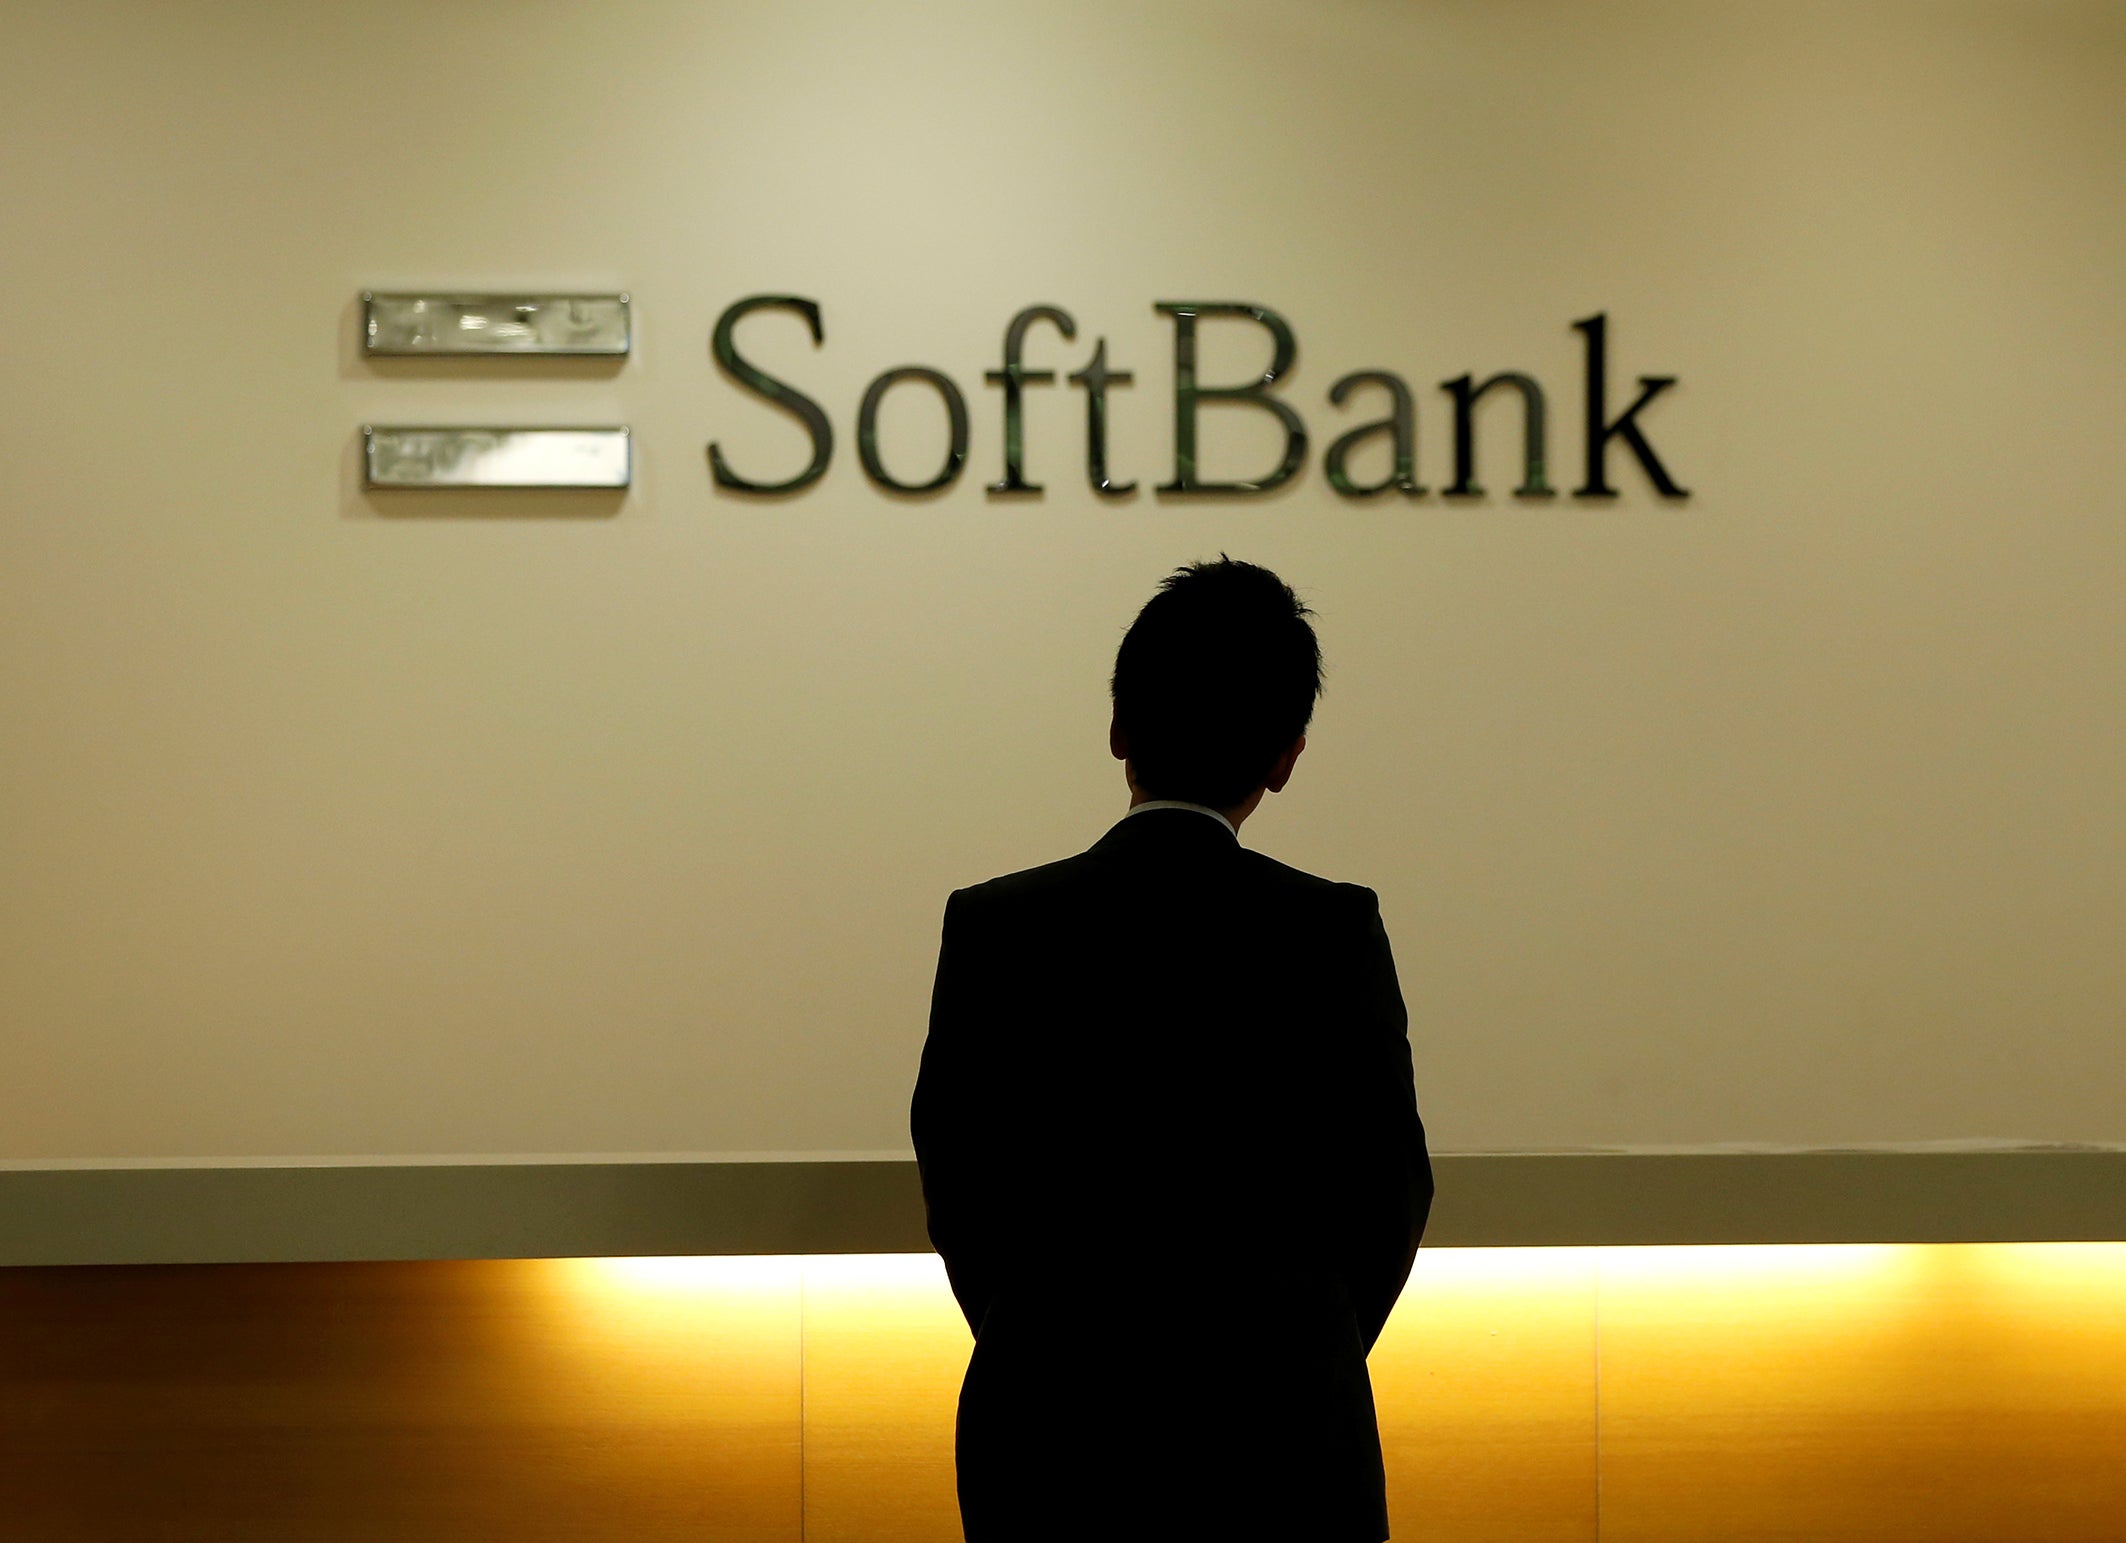 SoftBank should be good for ARM Holdings, but does Britain sell its tech stars too easily?